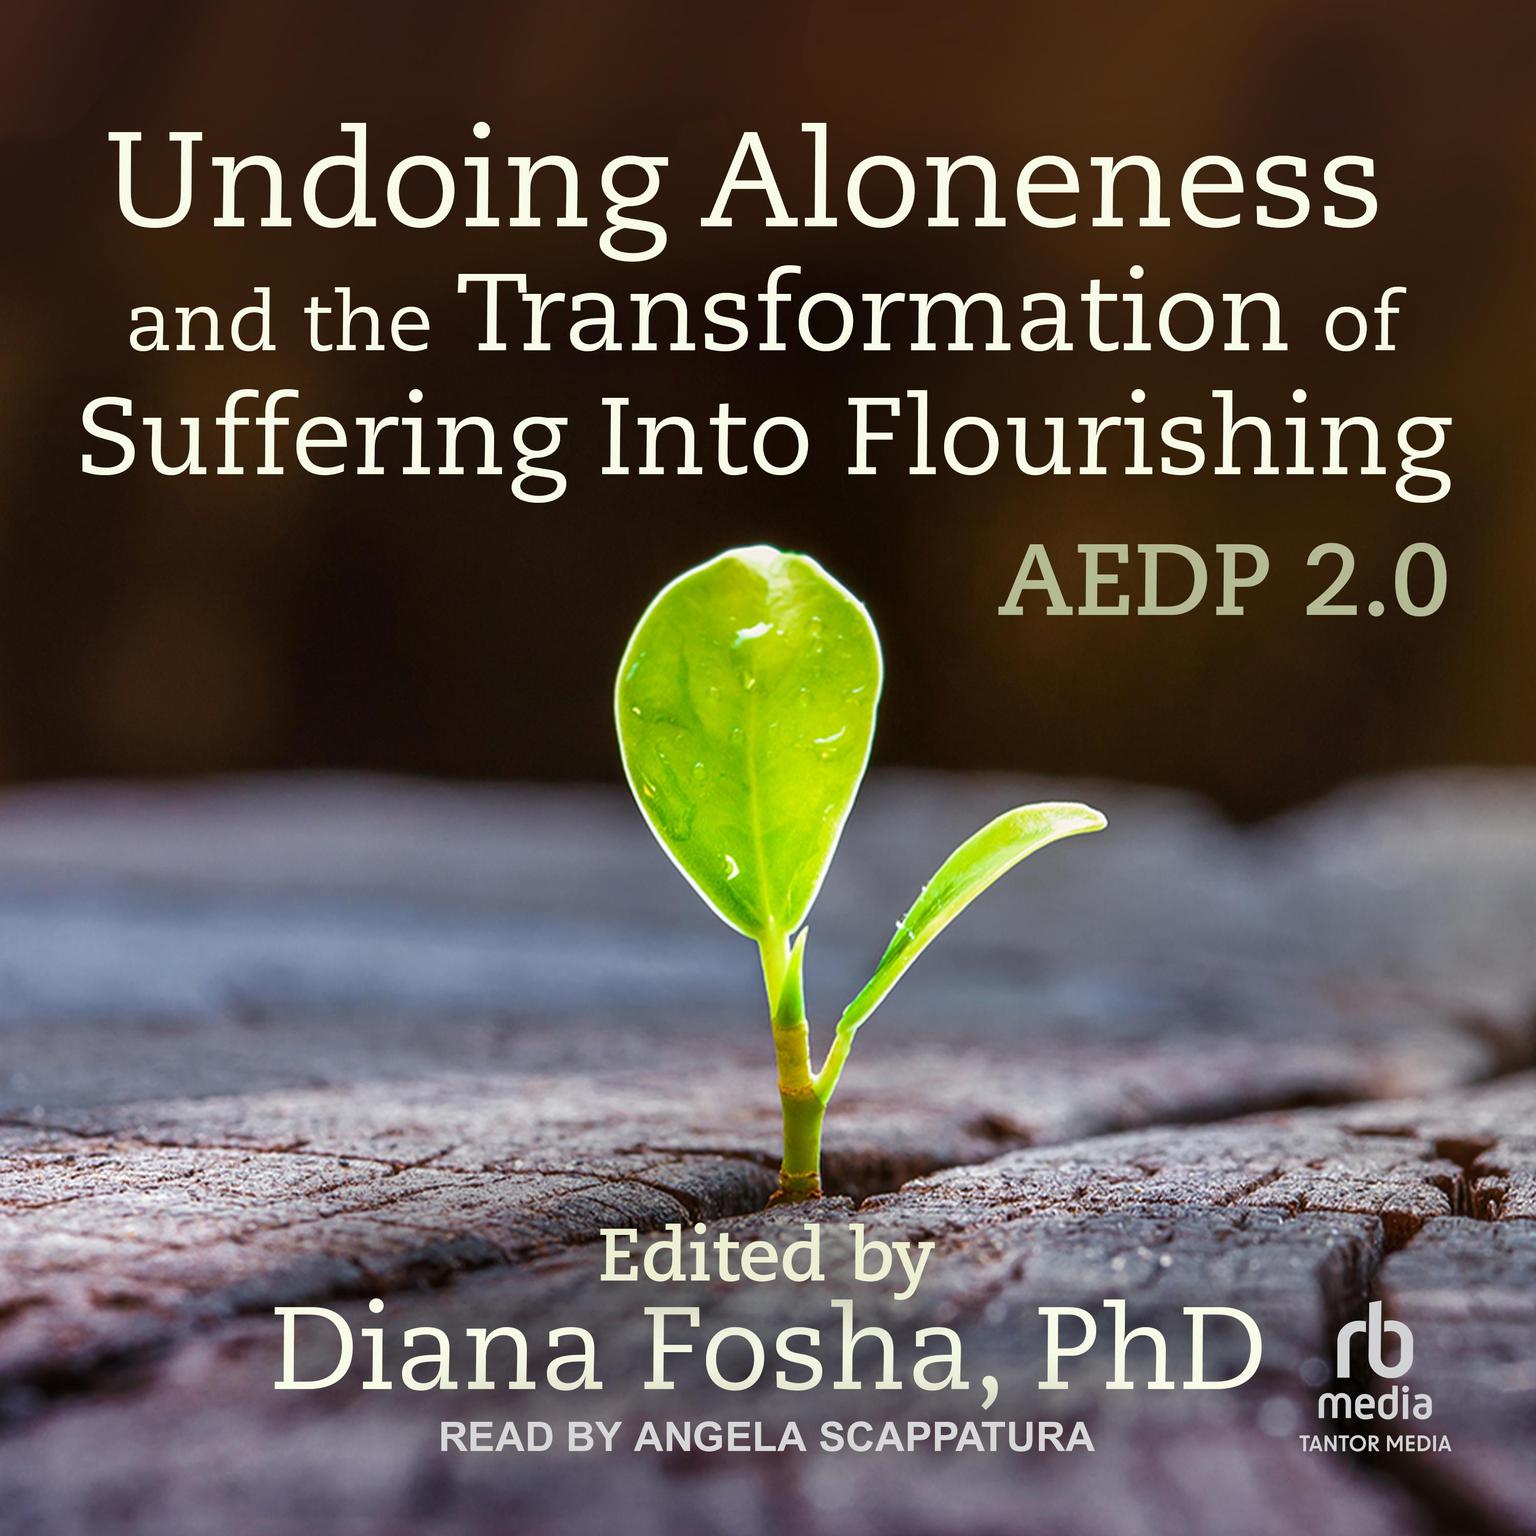 Undoing Aloneness and the Transformation of Suffering Into Flourishing: AEDP 2.0 Audiobook, by Diana Fosha